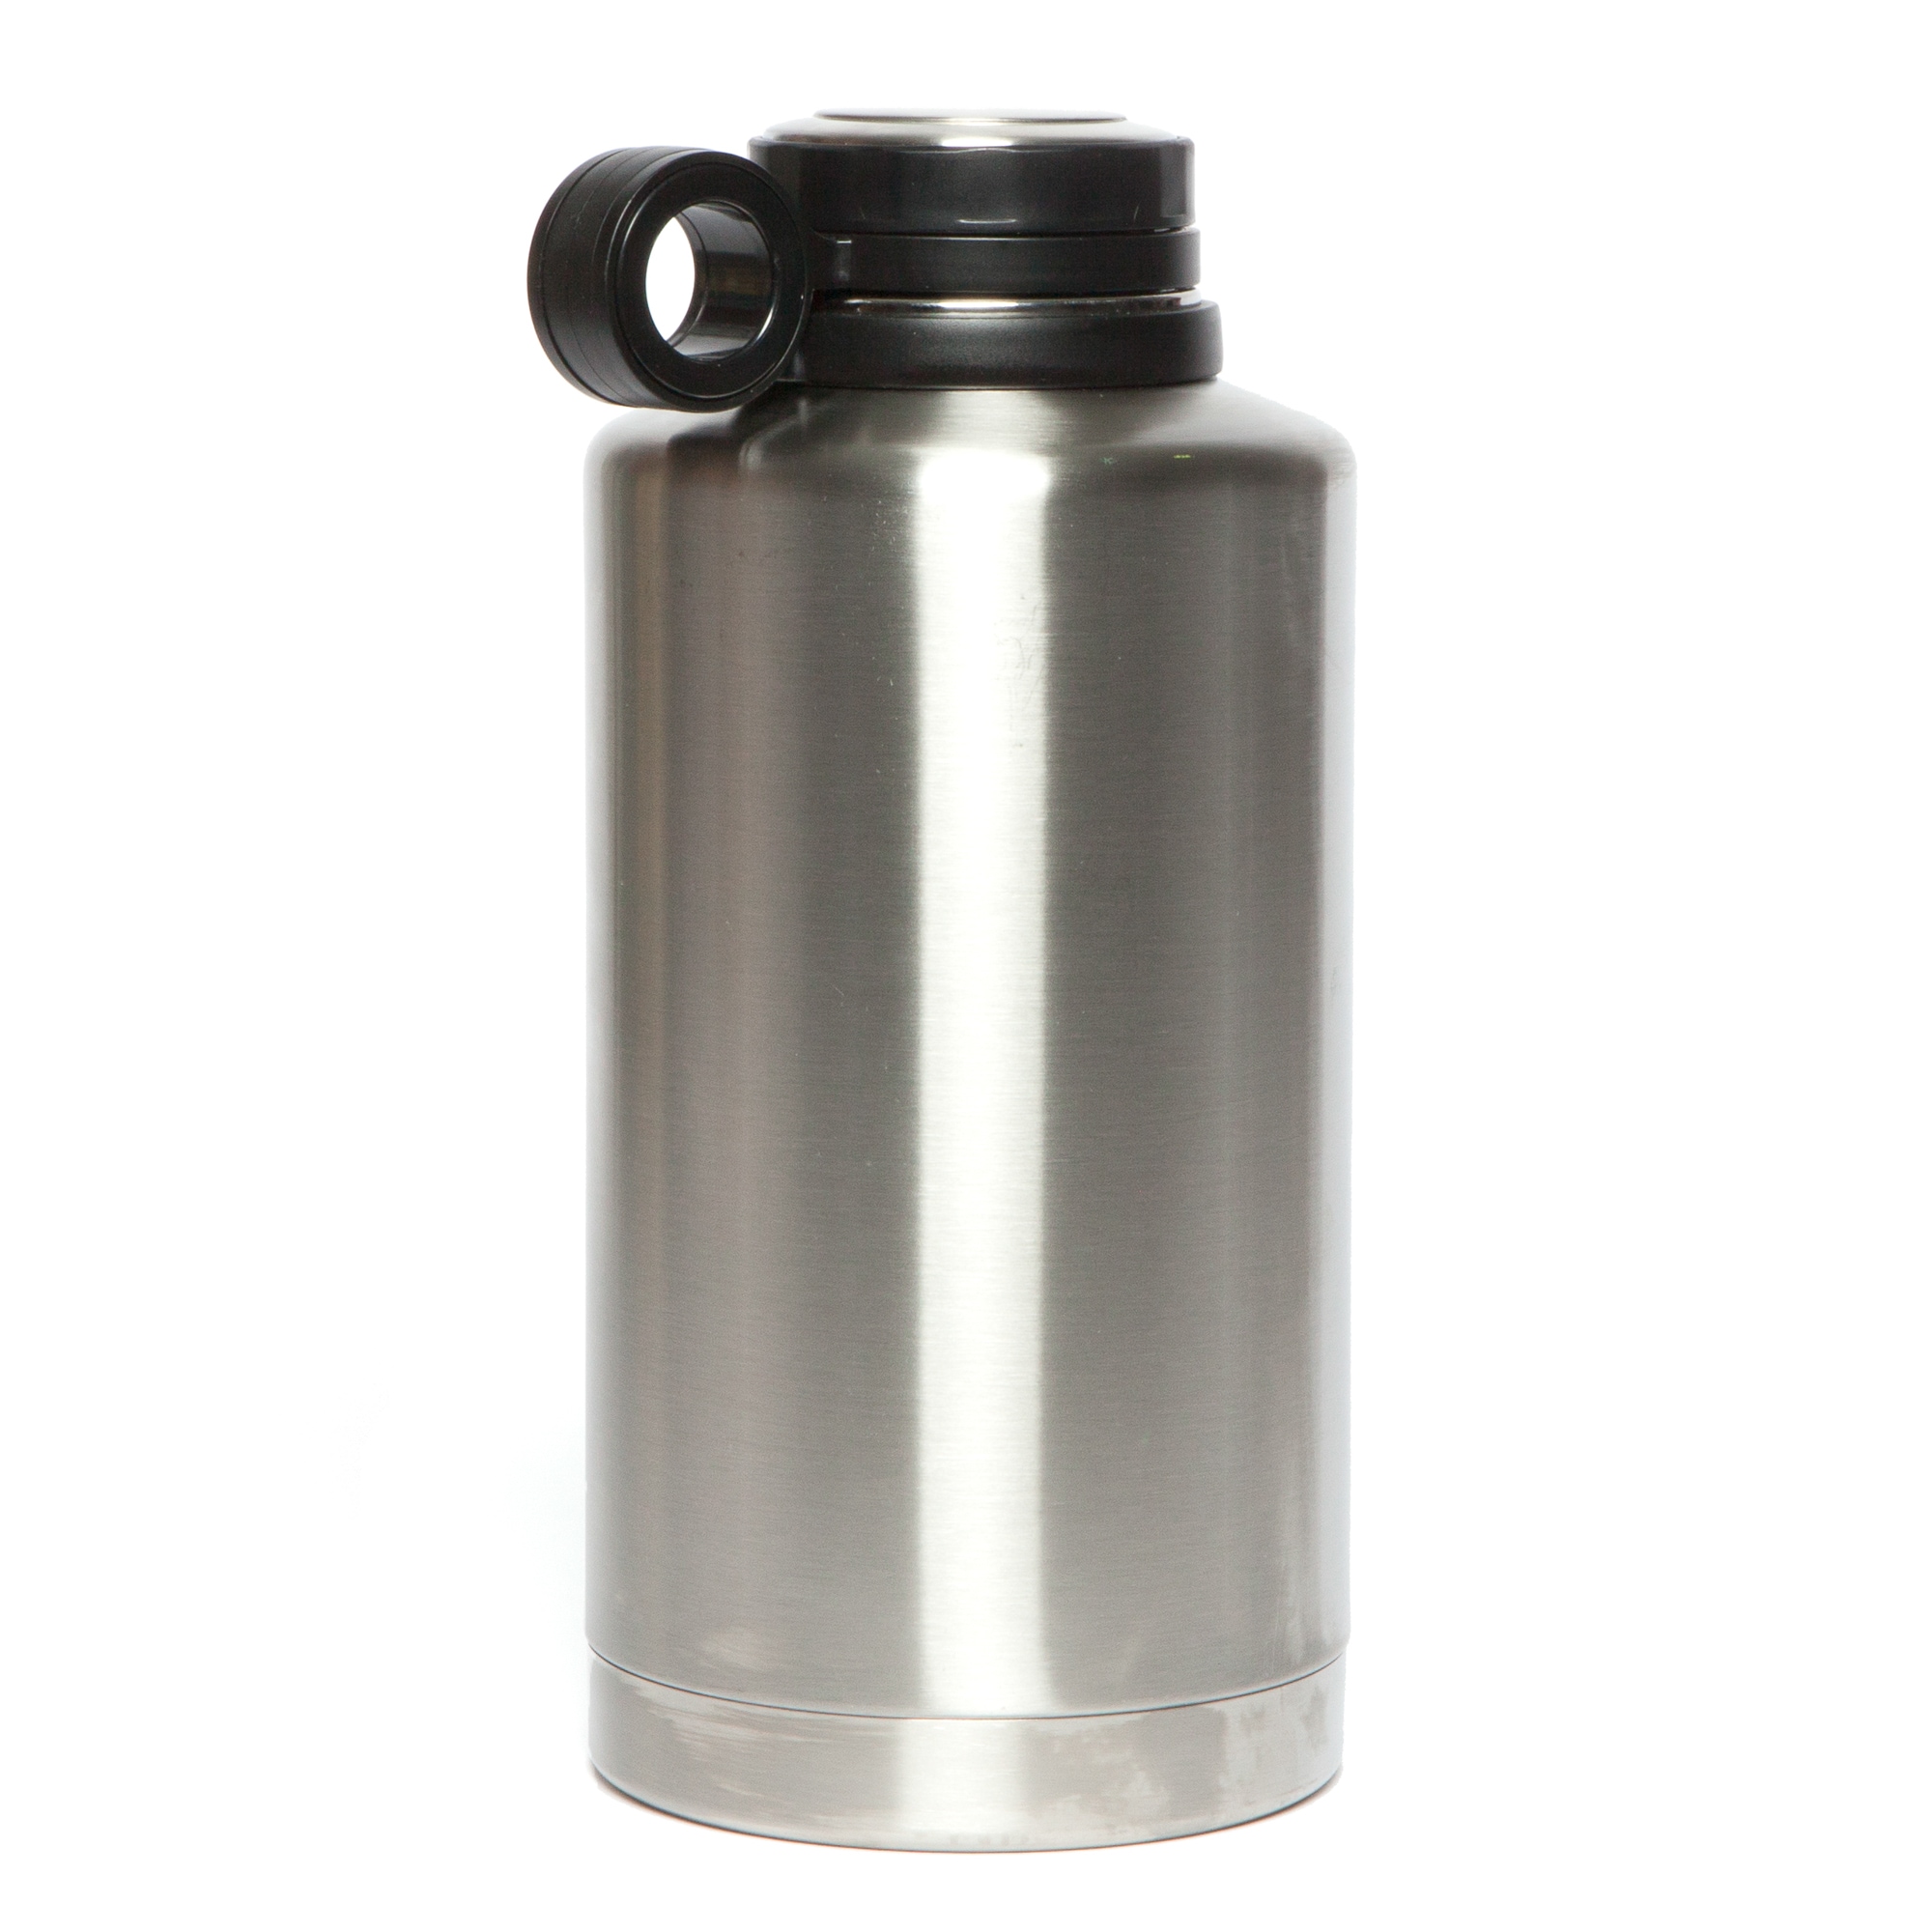 Manna�„� 40 Oz. Thermo Vacuum Insulated Flask - Steel Bottles with